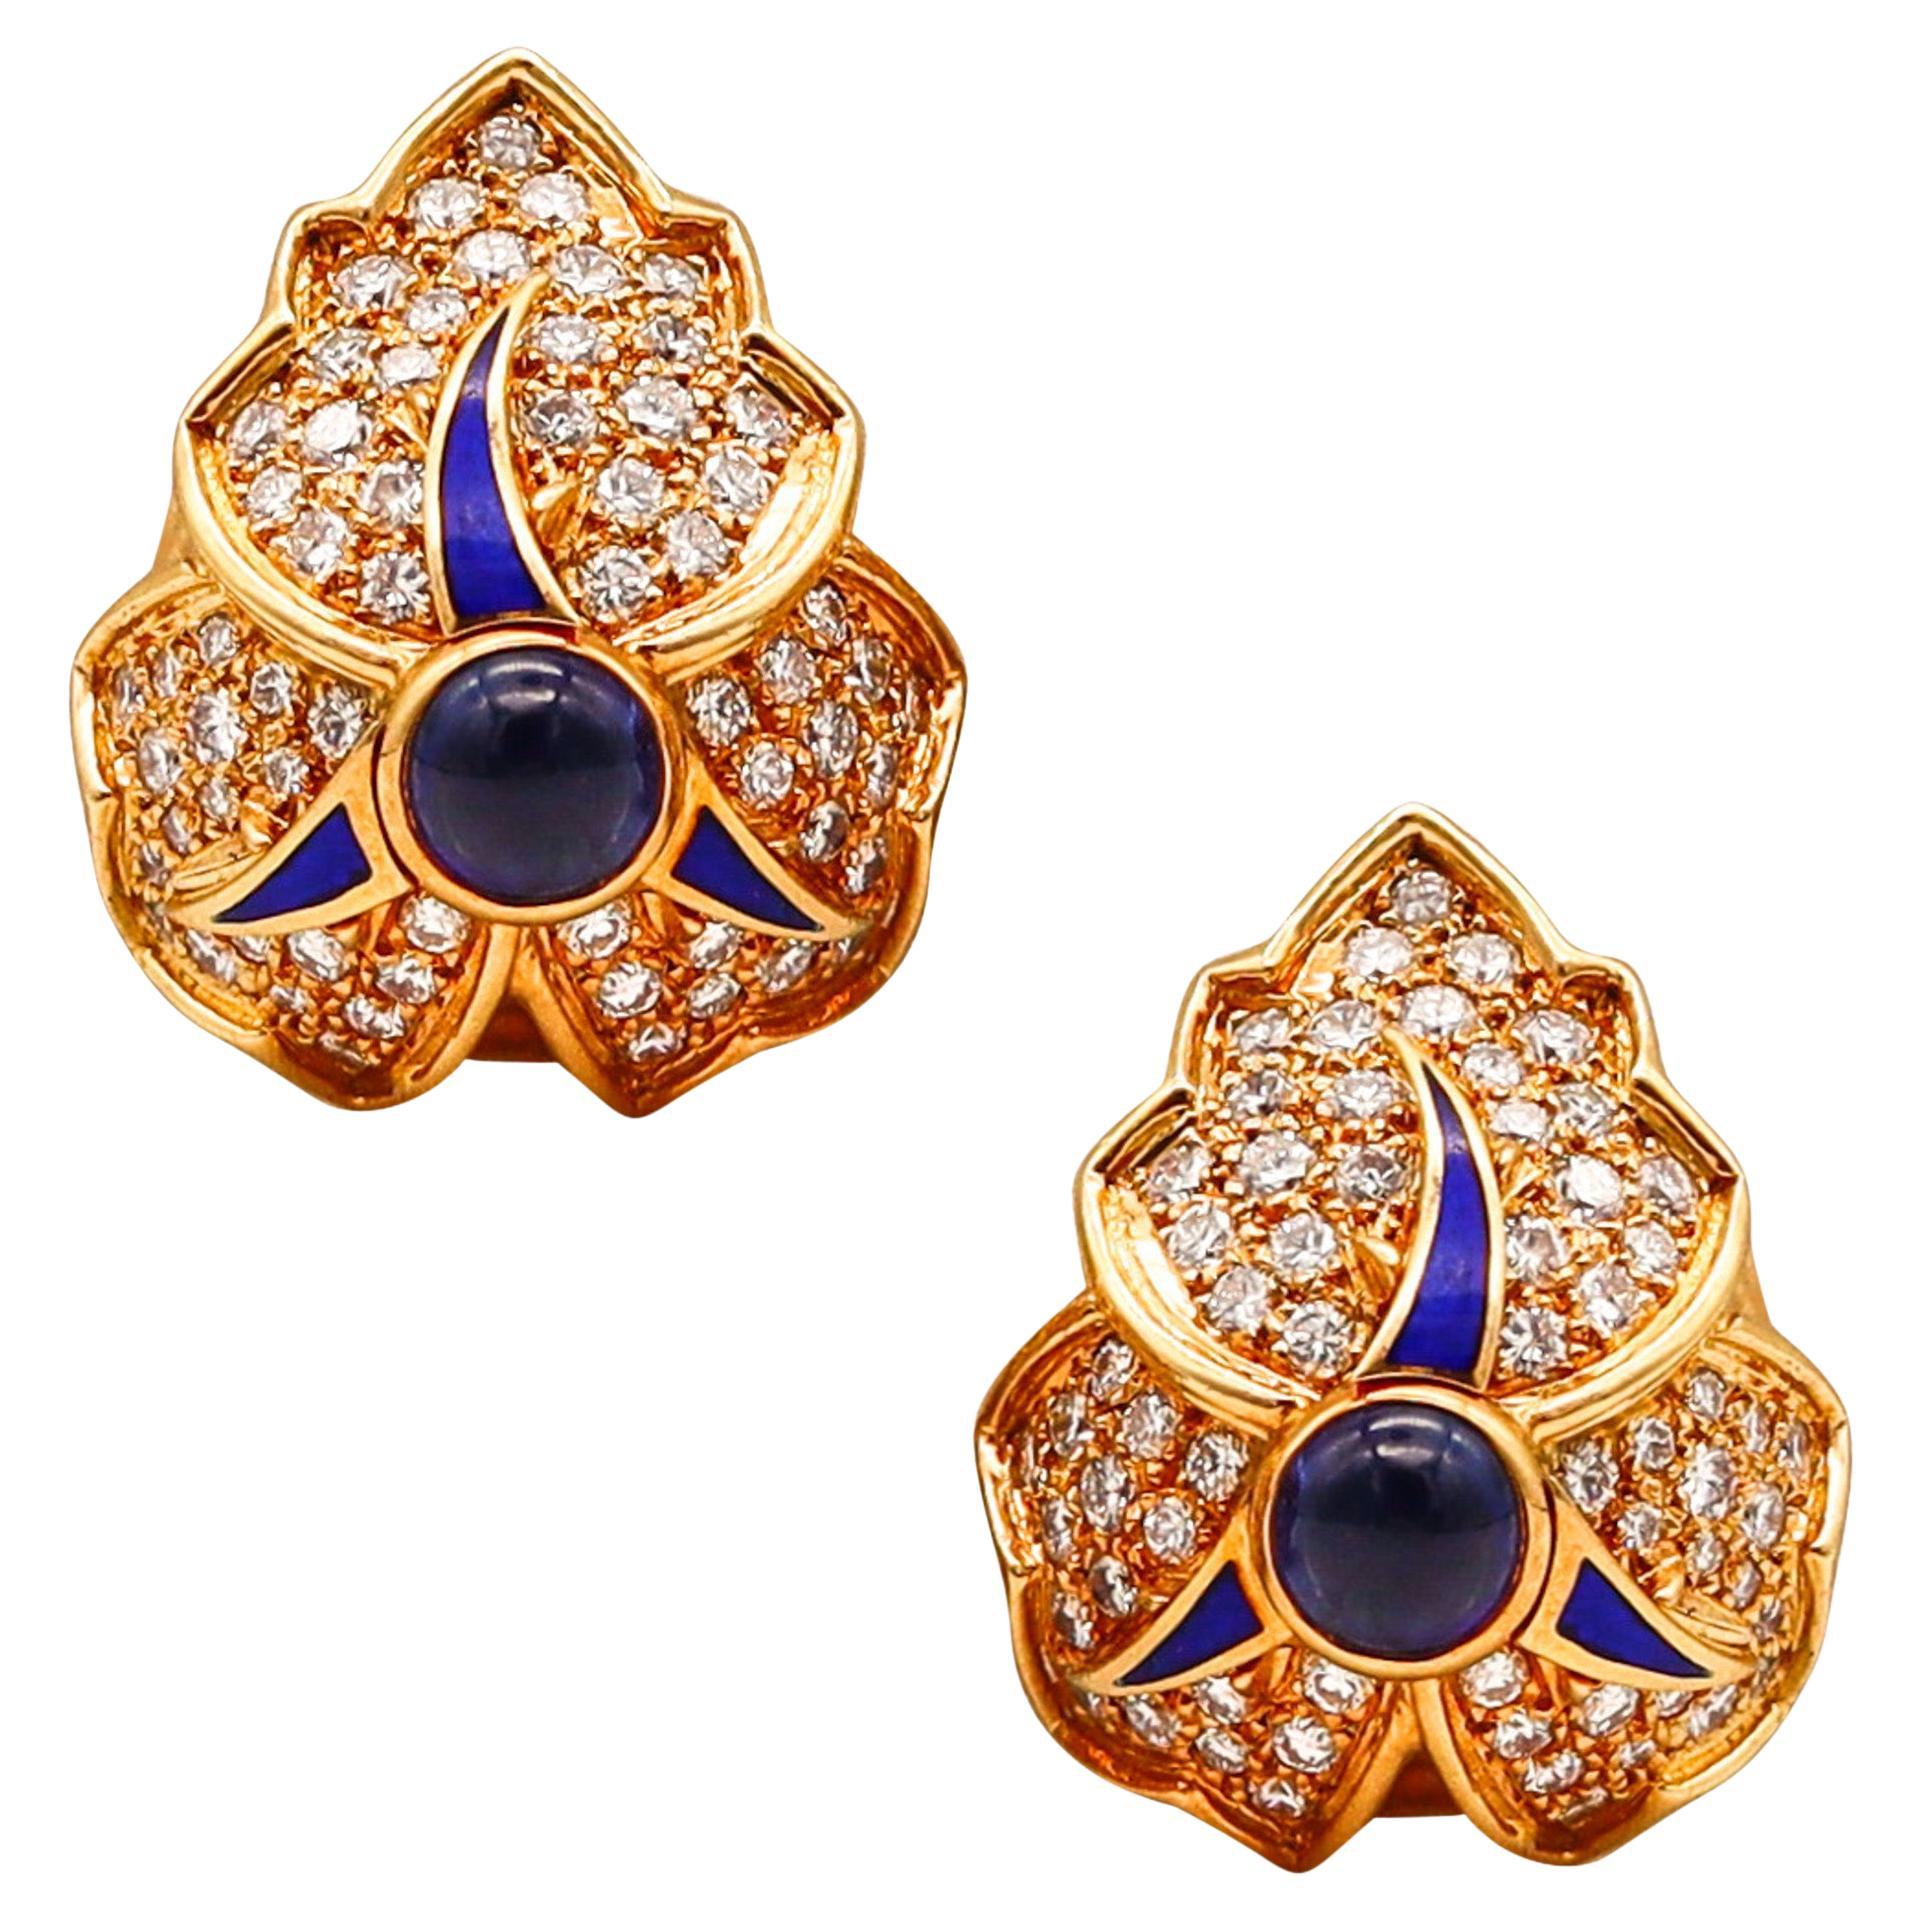 Chaumet Paris Clip On Earrings In 18Kt Gold With 5.64 Ctw Sapphires & Diamonds